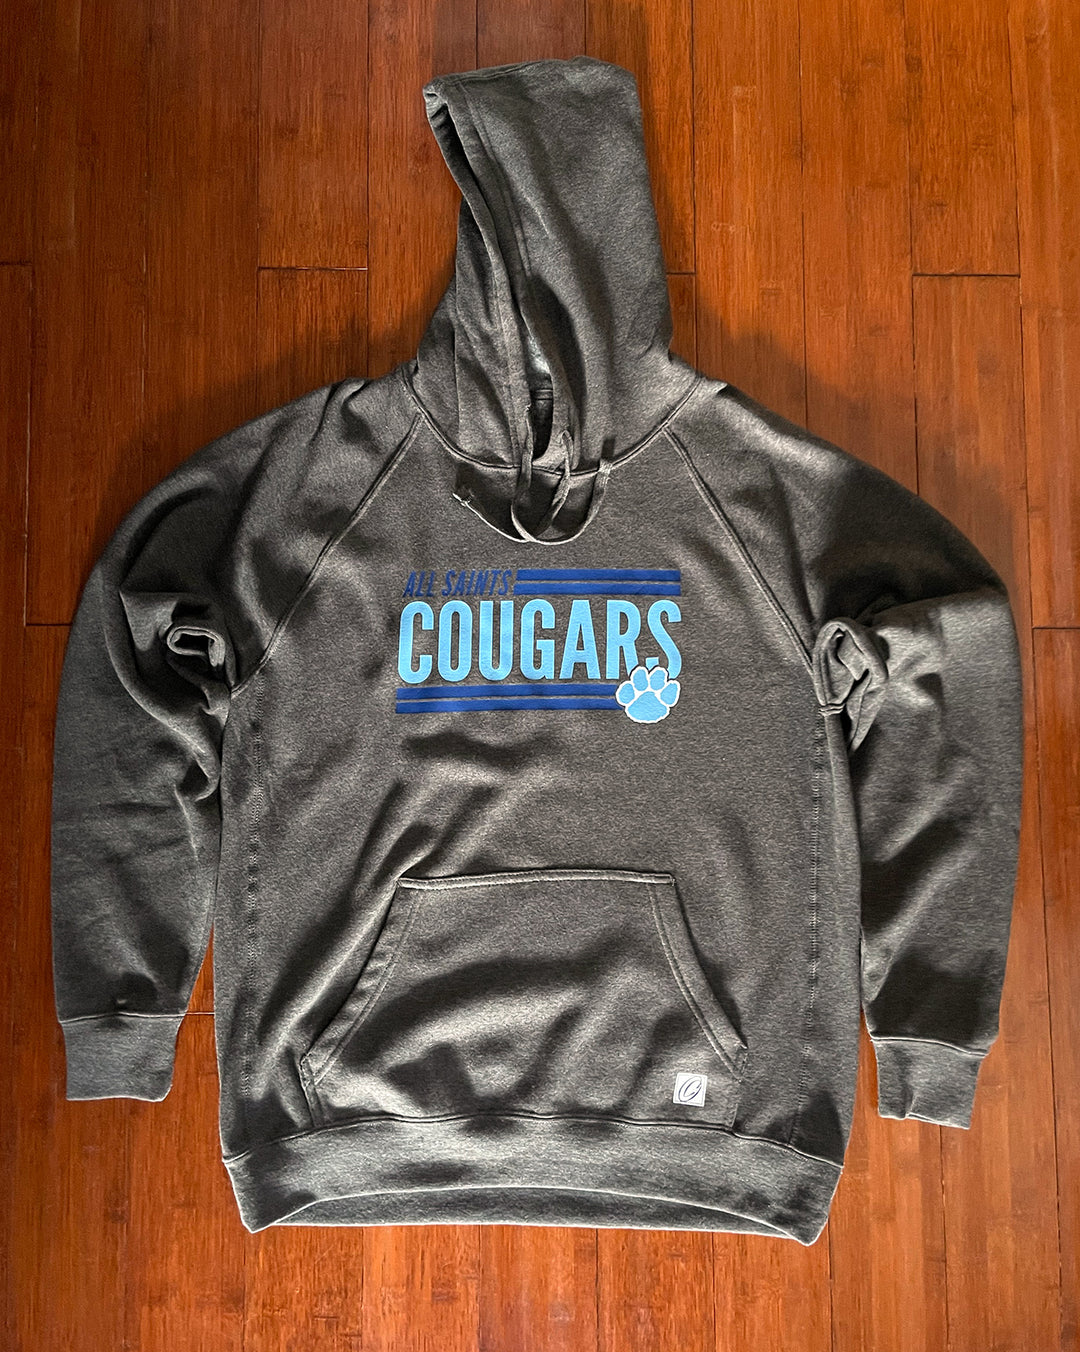 Adult L Independent Trading Company Special Blend Raglan Hoodie - All Saints Cougars - Spirit Wear